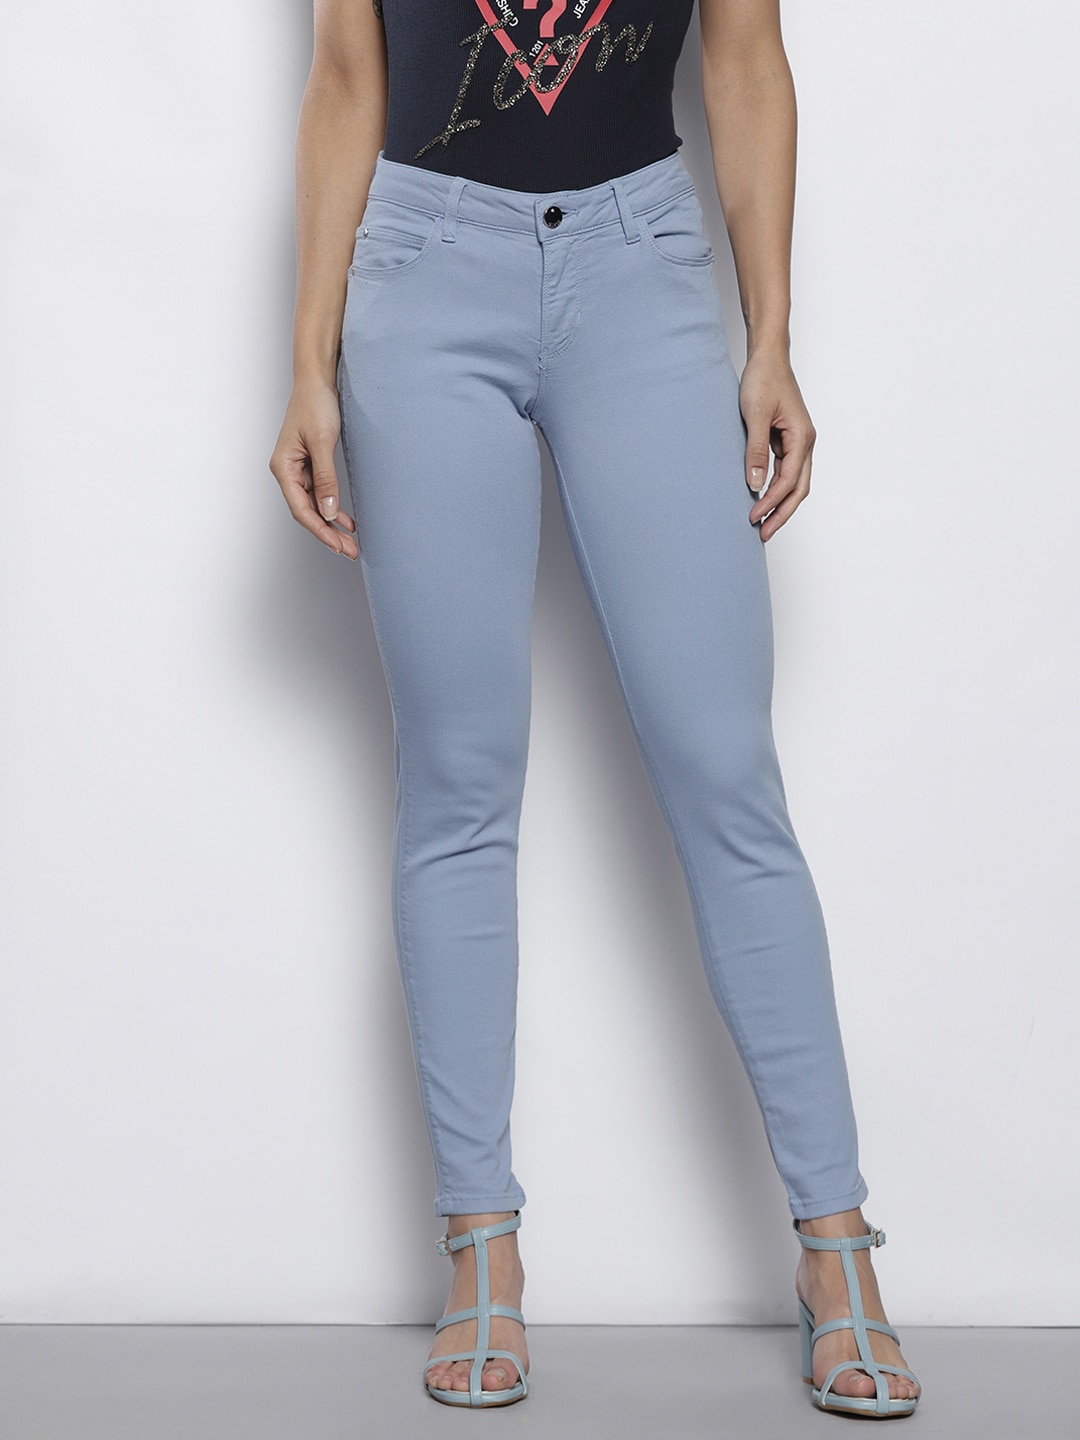 GUESS Women Blue Solid Skinny Fit Jeans Price in India